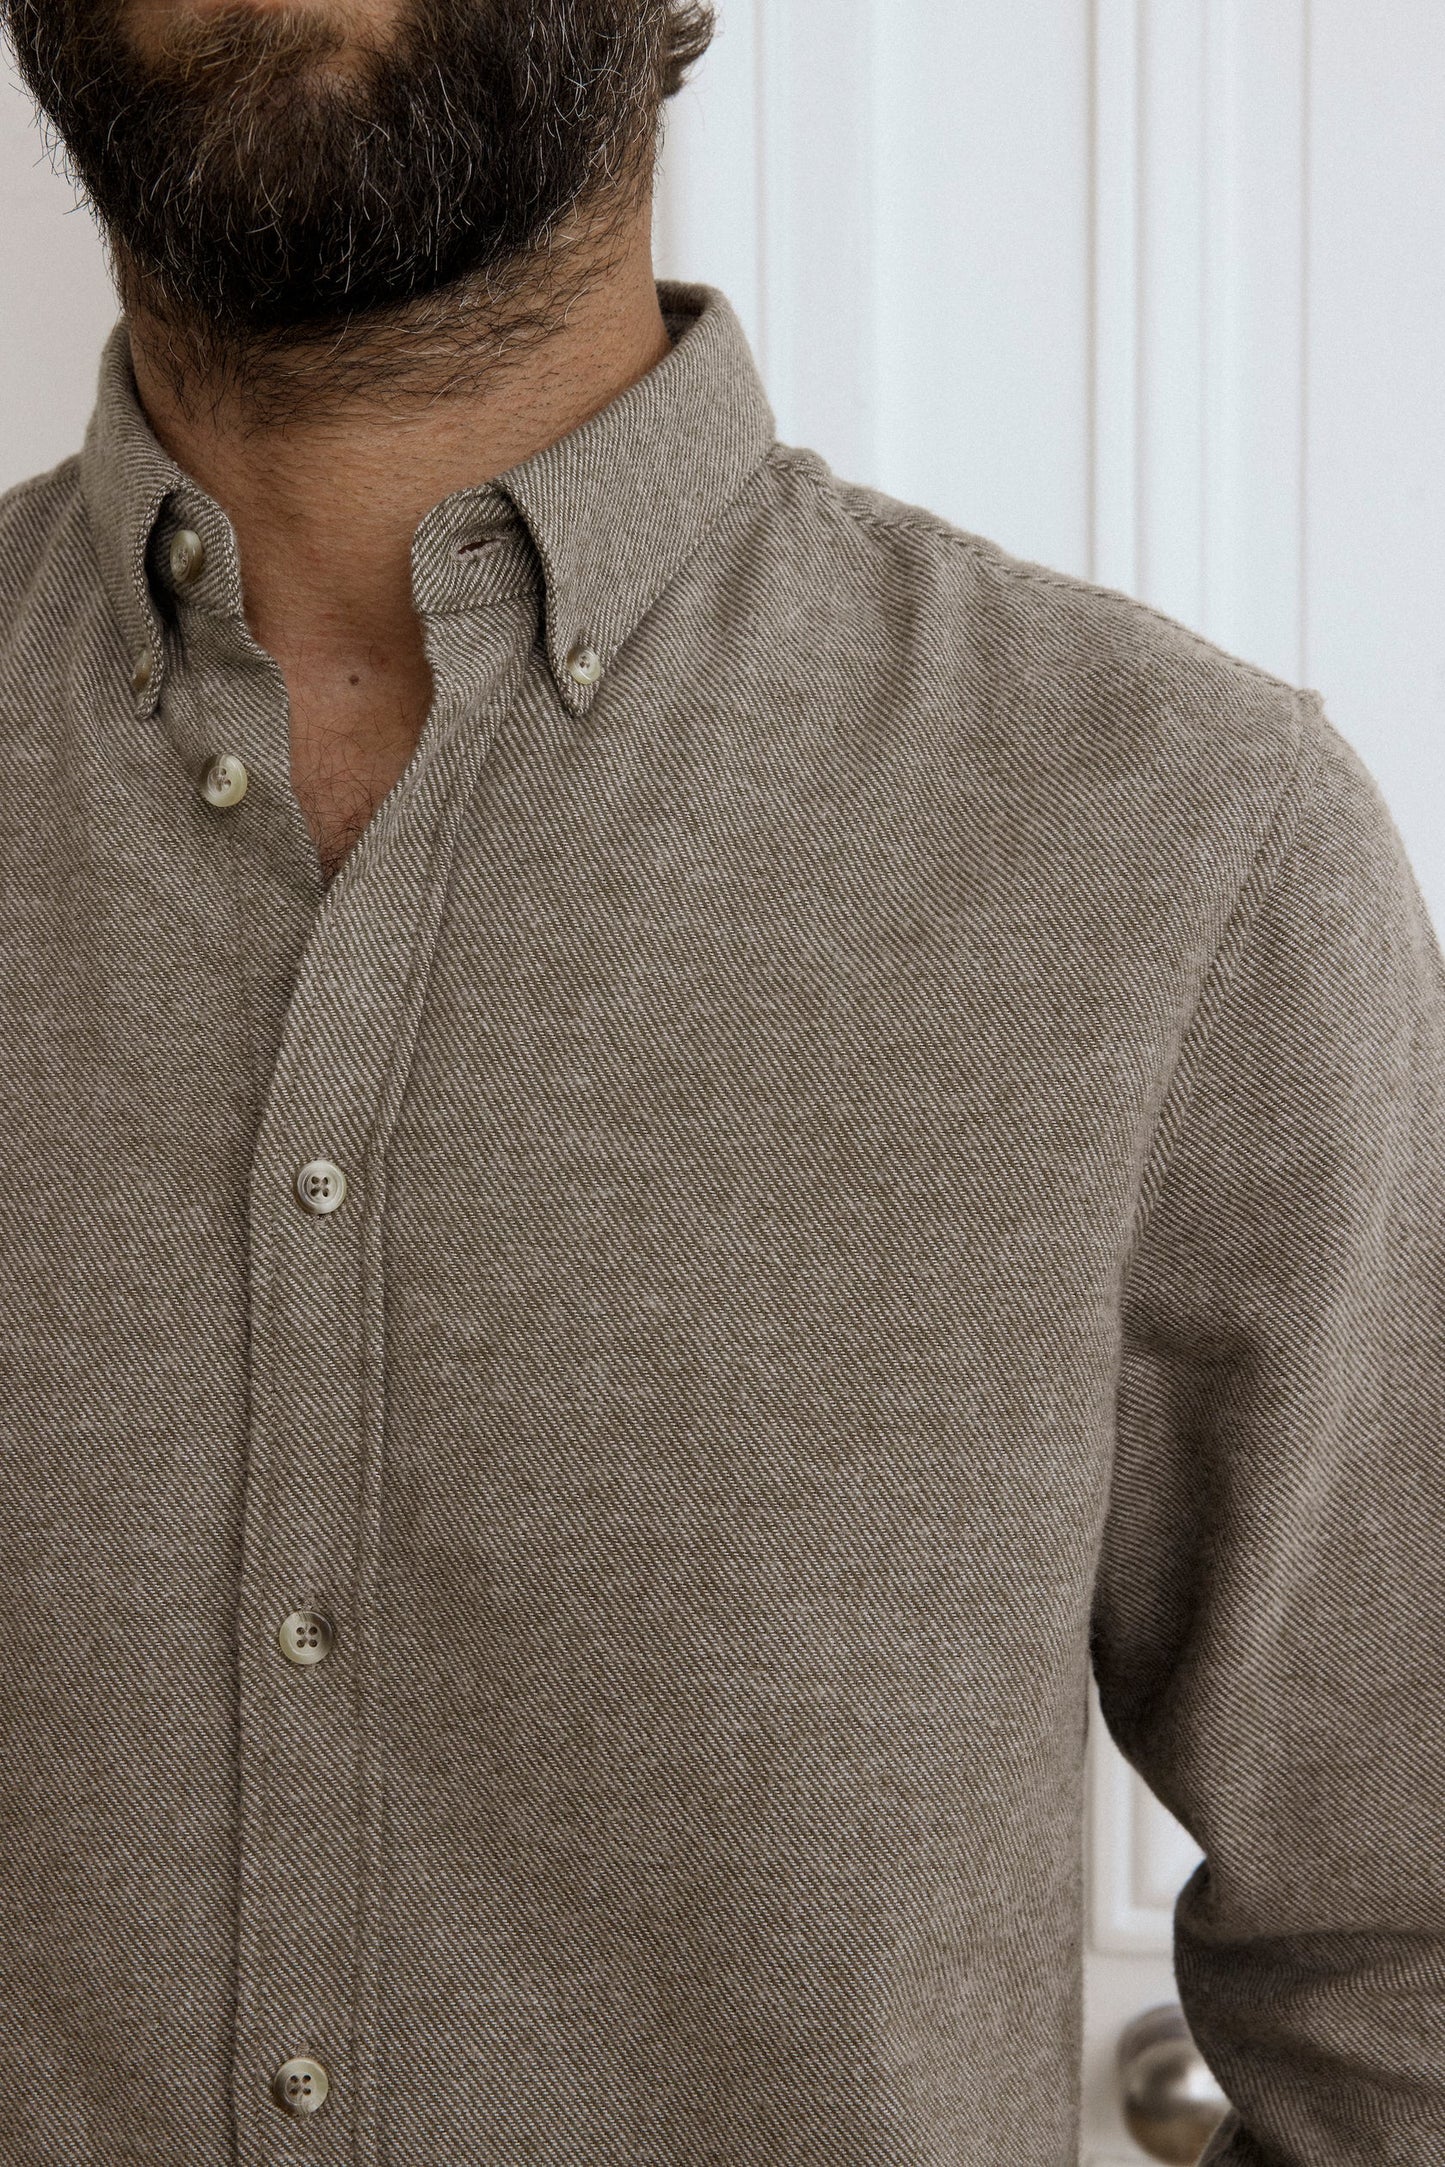 CUISSE DE GRENOUILLE - Massimo Brushed Twill Shirt